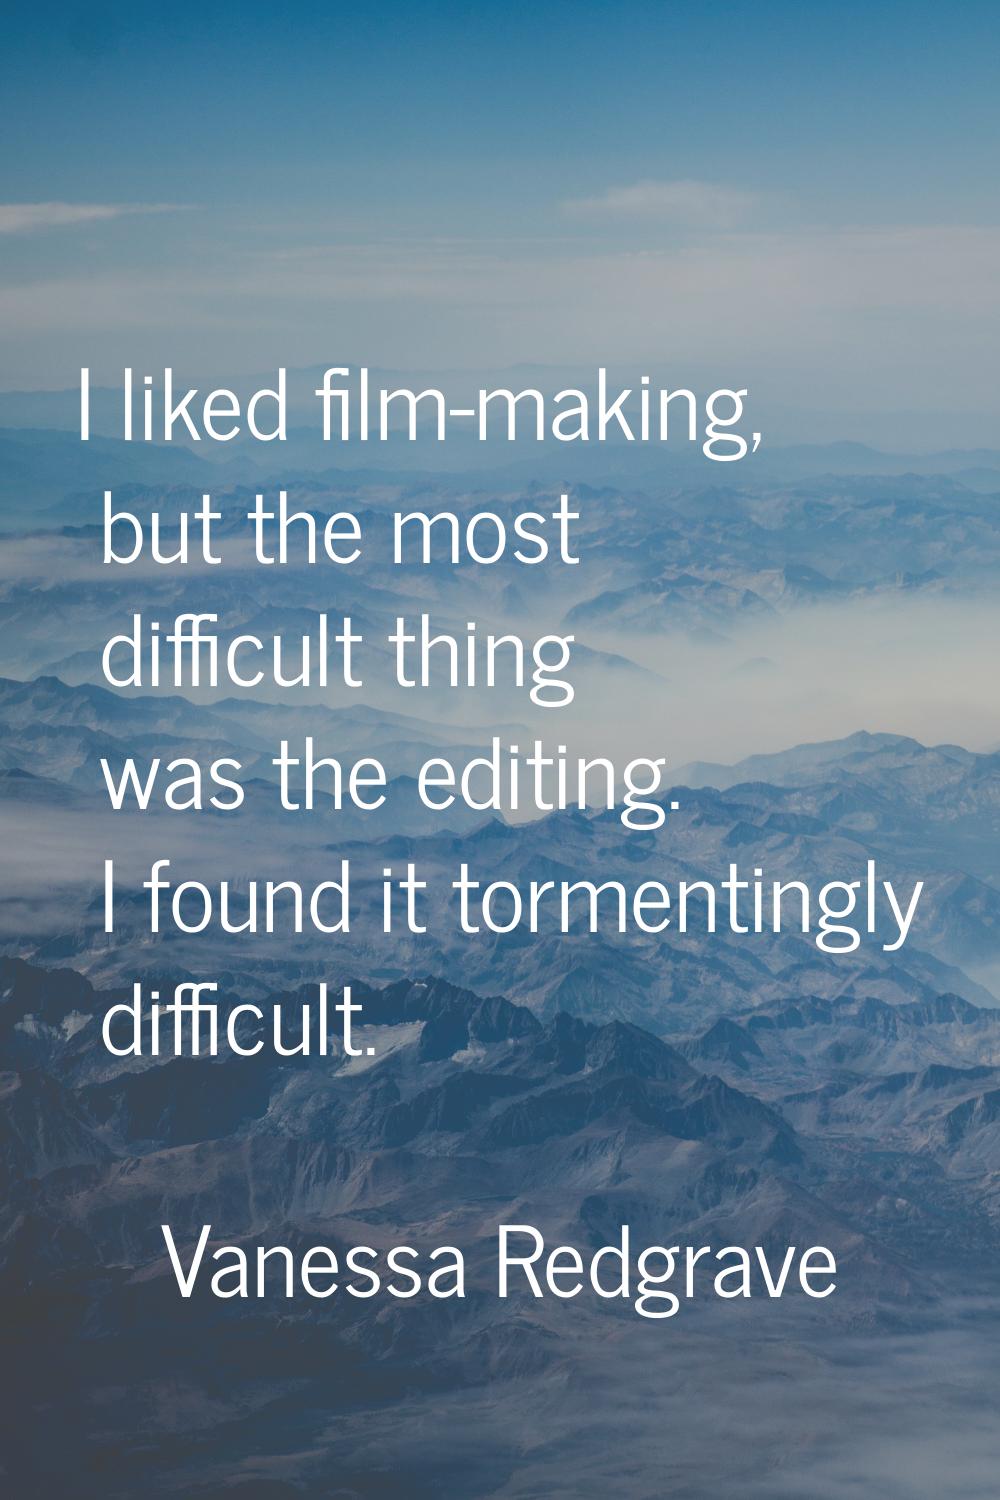 I liked film-making, but the most difficult thing was the editing. I found it tormentingly difficul